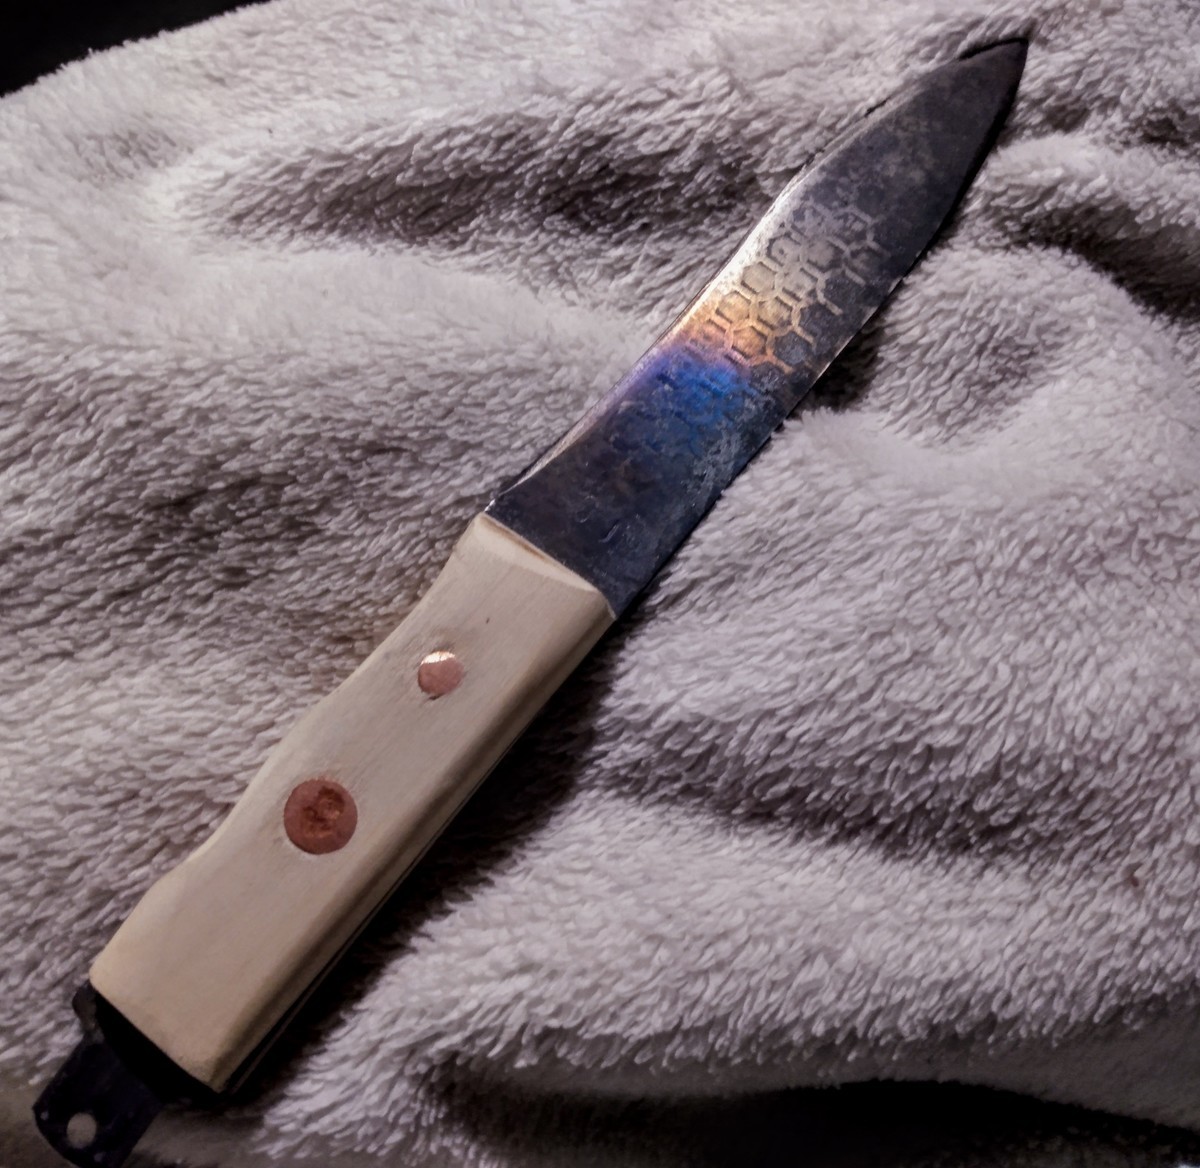 Kive. Carven of a sawsall blade and with a handle of poplar riveted with copper nails and featuring temper colors on the blade which likely over the metallurgy.